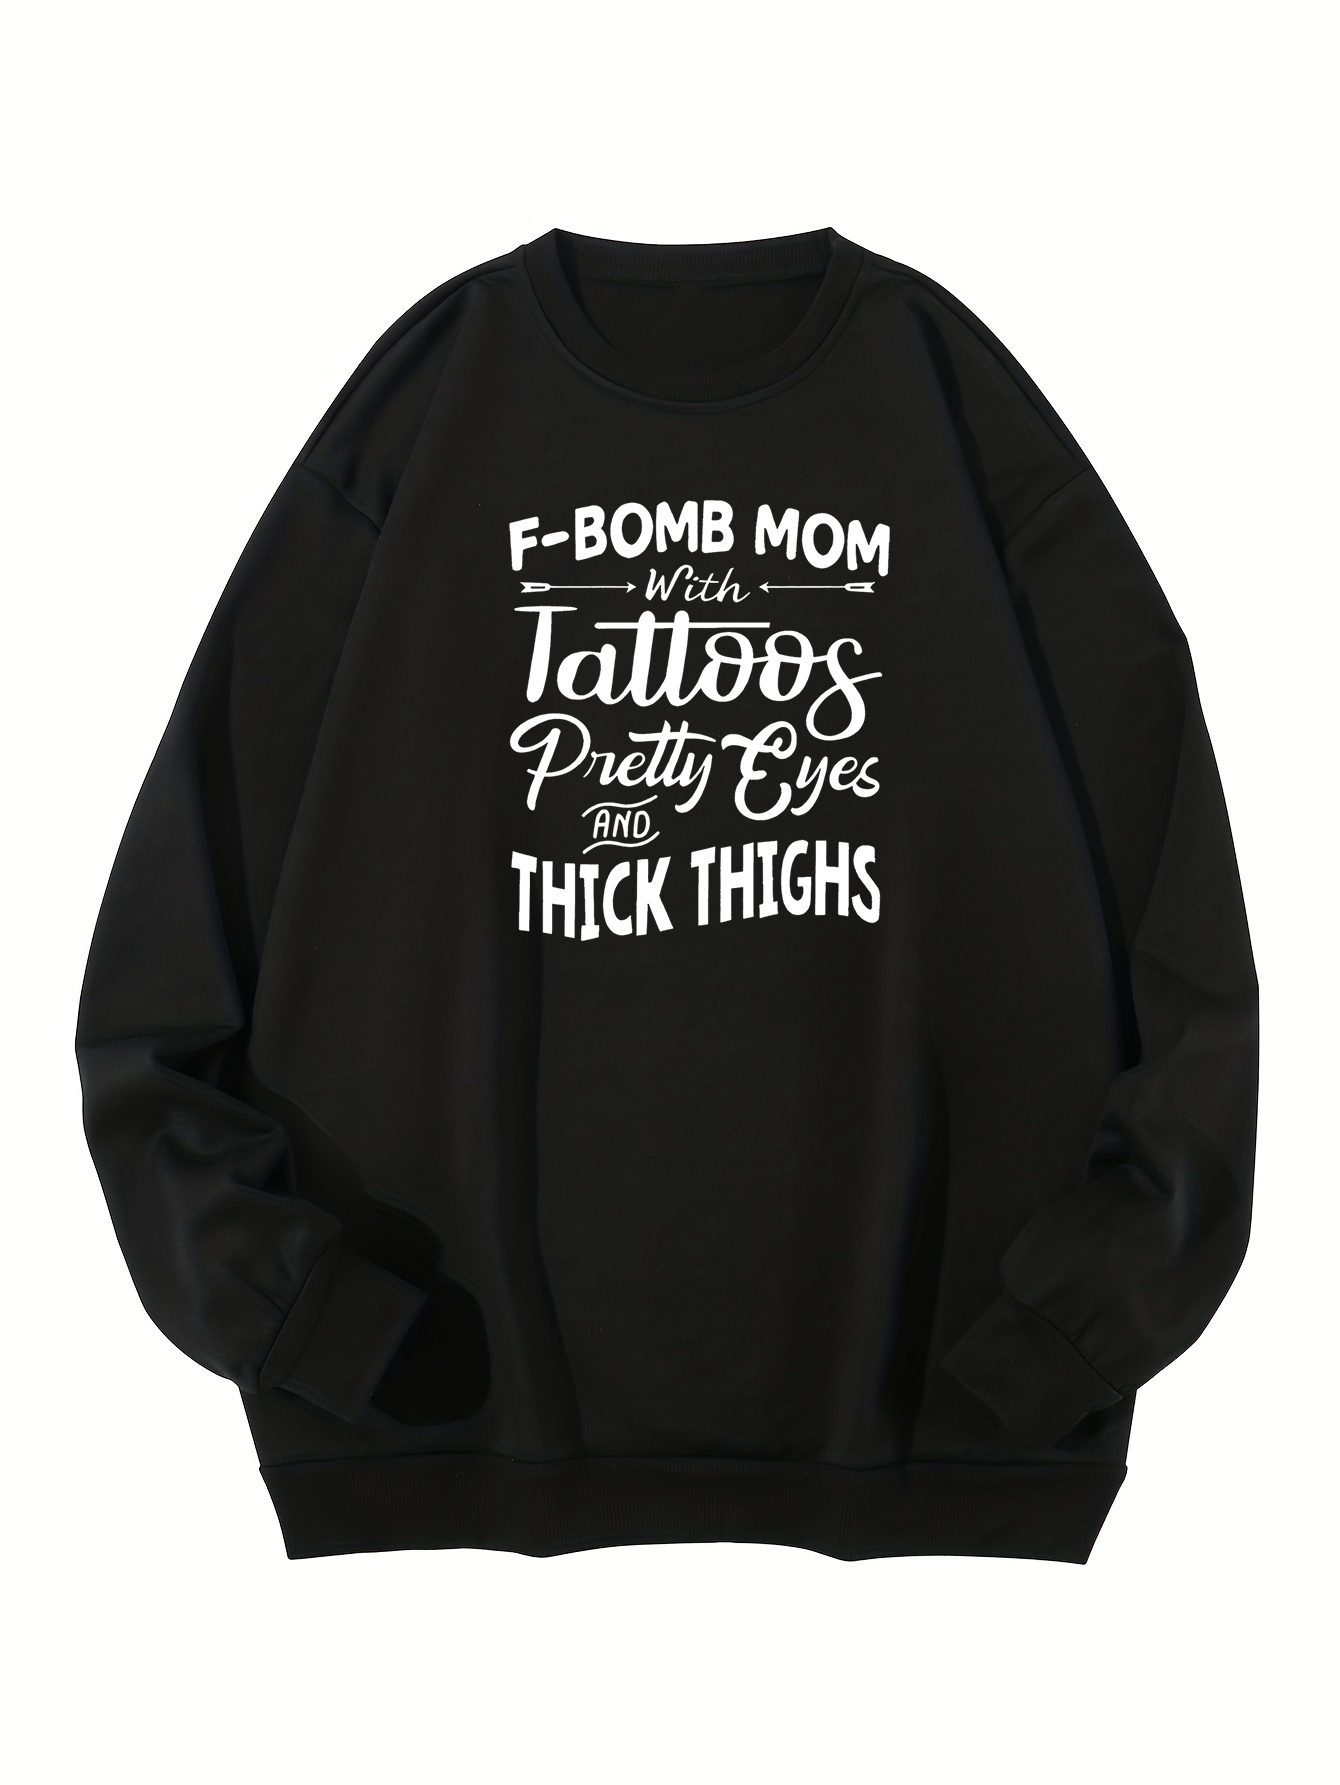 Plus Size Men&#39;s &quot;Thick Things&quot; Graphic Print Sweatshirt For Spring Fall Winter, Men&#39;s Clothing